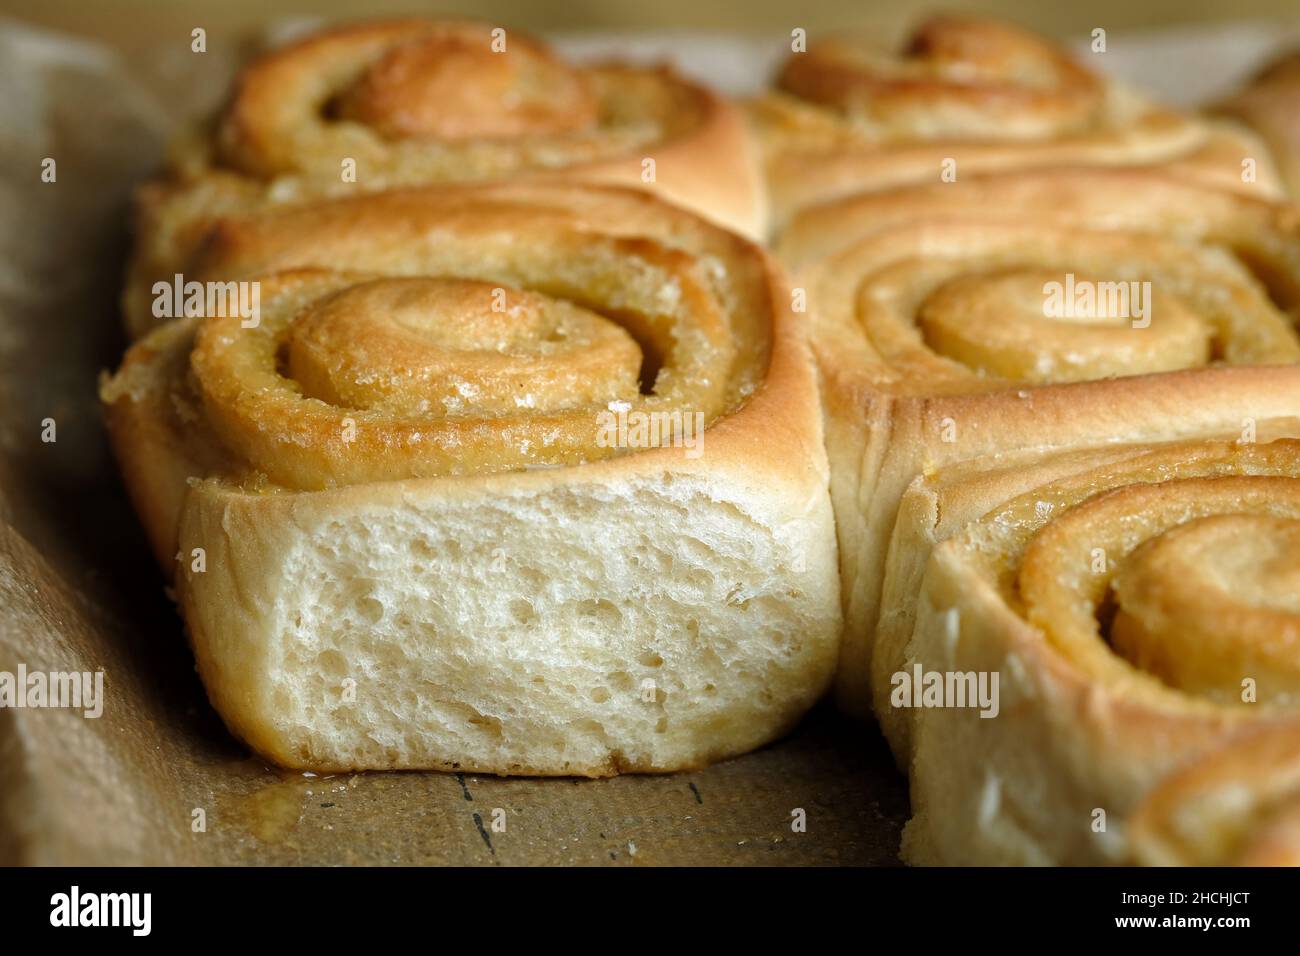 A tray of freshly baked bach of home made, lemon swirl Chelsea buns. The buns are still as baked and not separated on baking paper Stock Photo